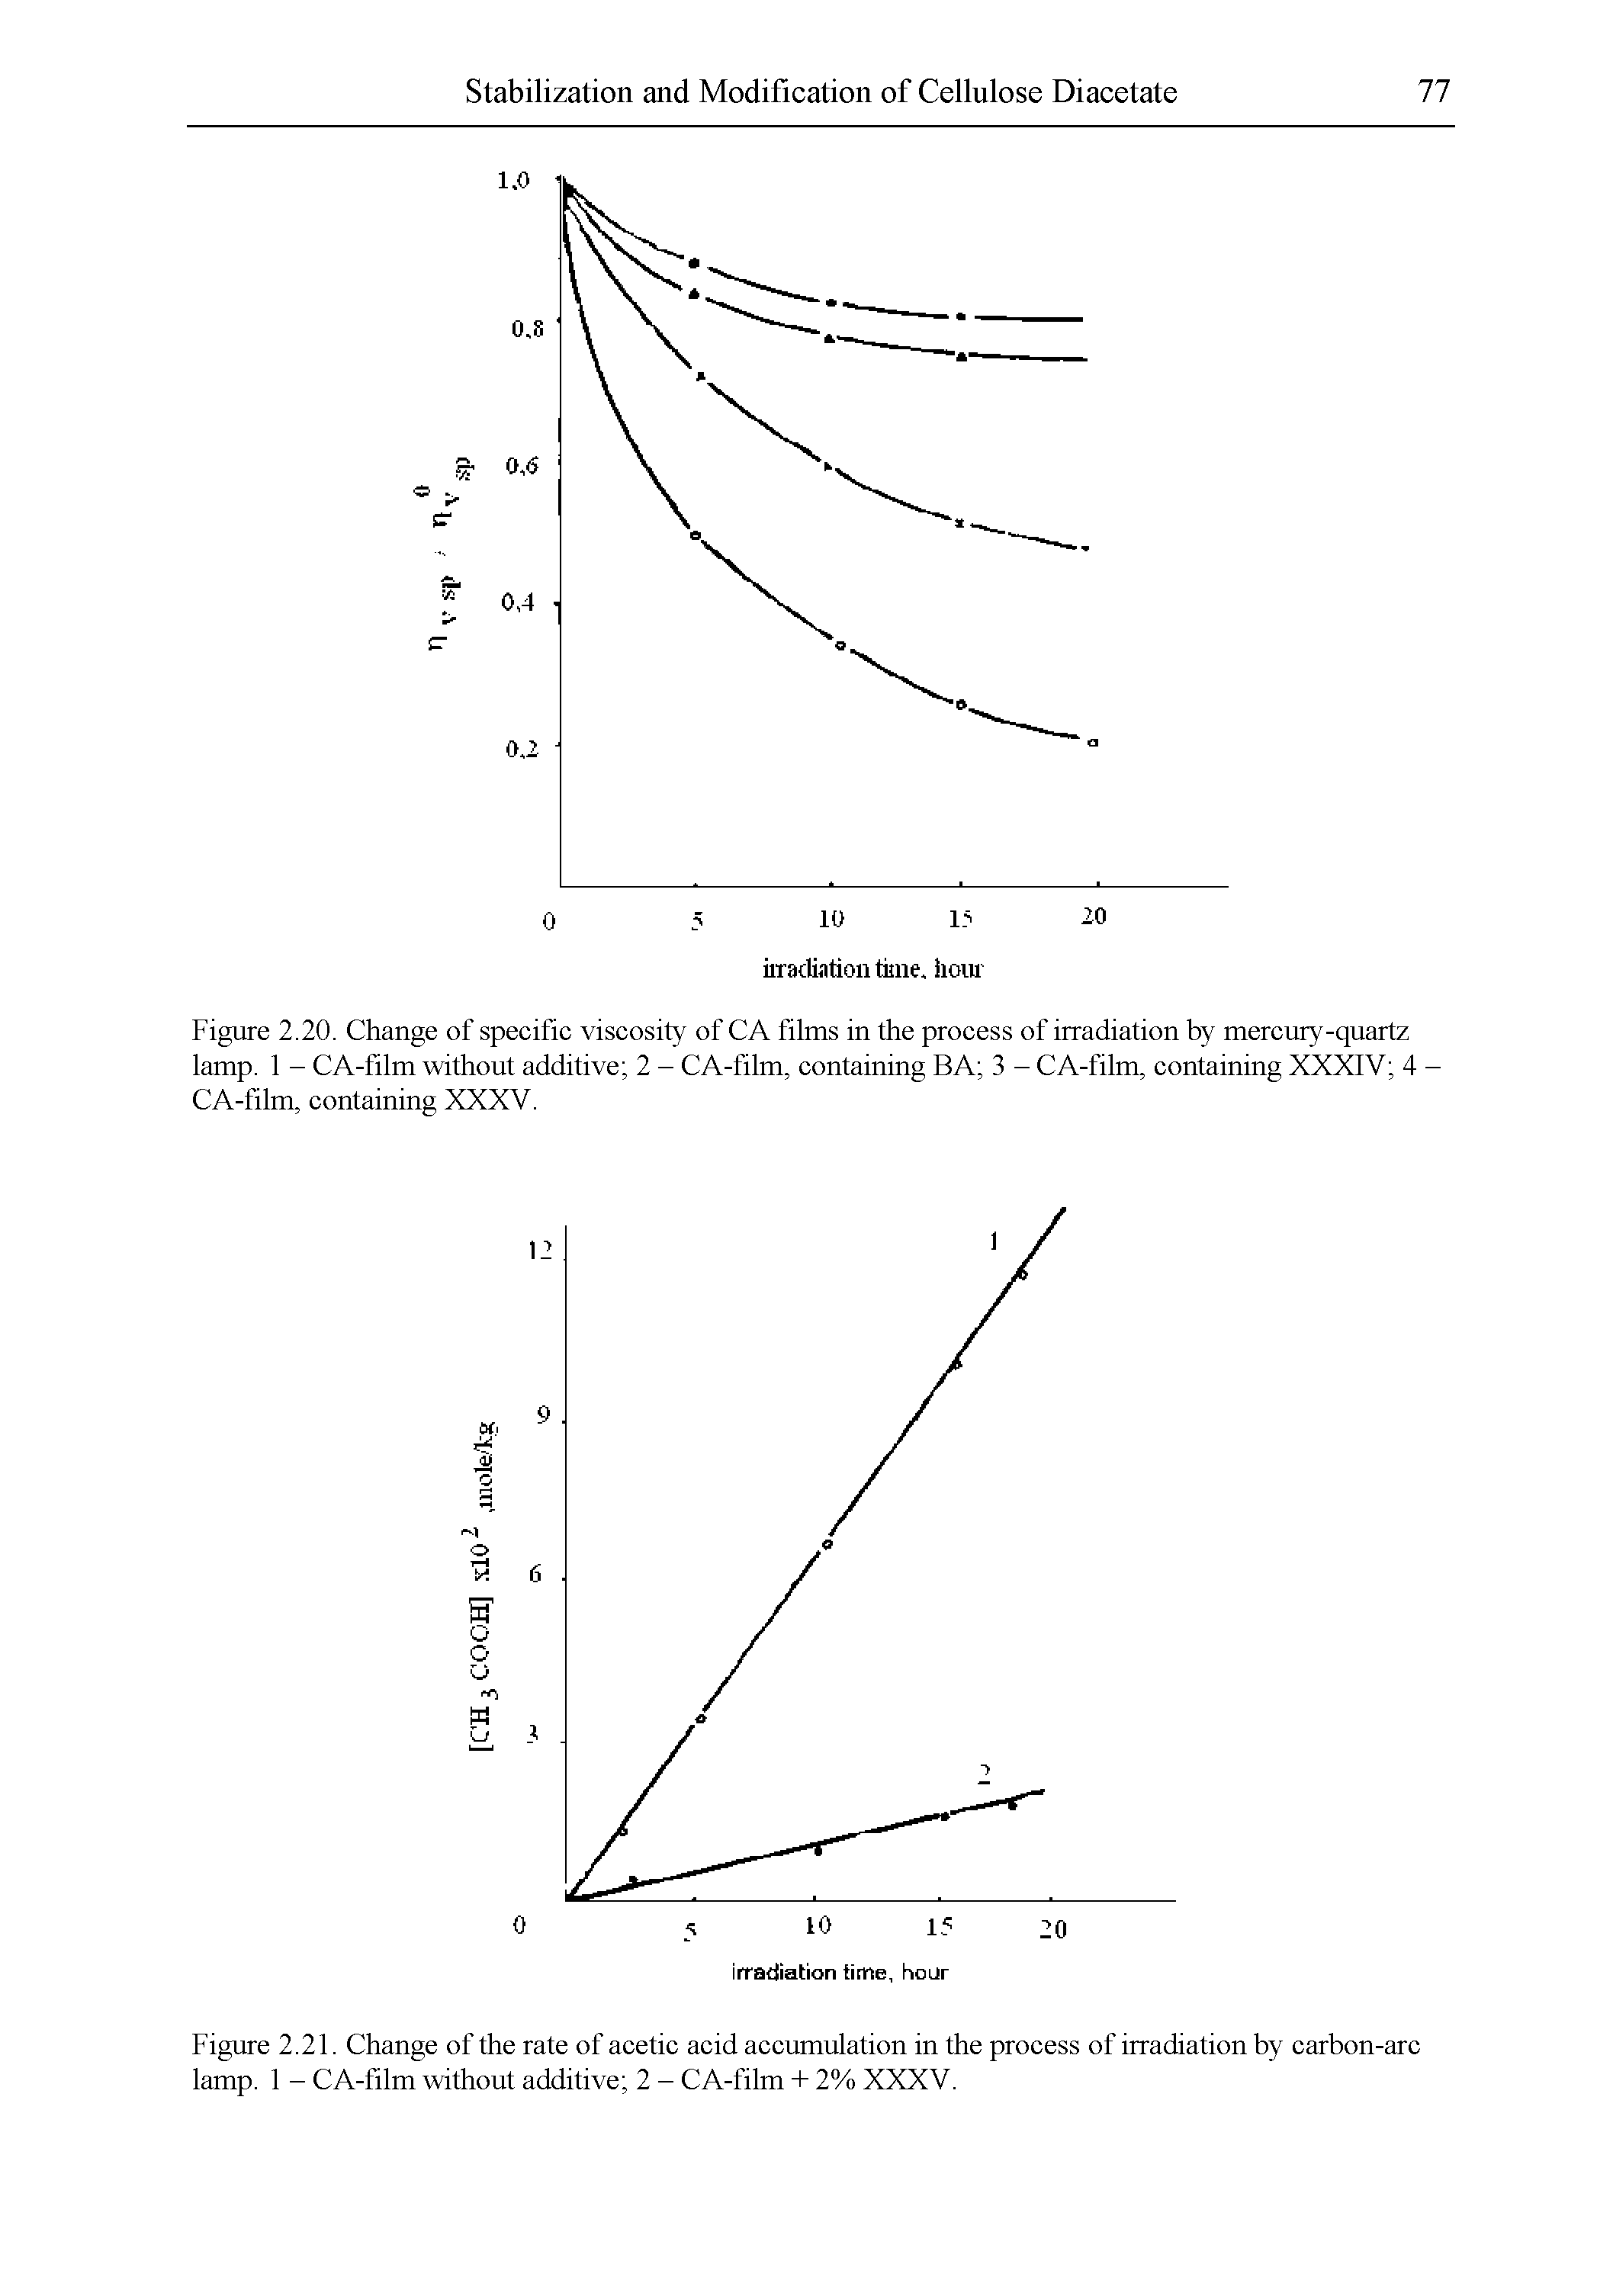 Figure 2.21. Change of the rate of acetic acid accumulation in the process of irradiation by carbon-arc lamp. 1 - CA-film without additive 2 - CA-film -H 2% XXXV.